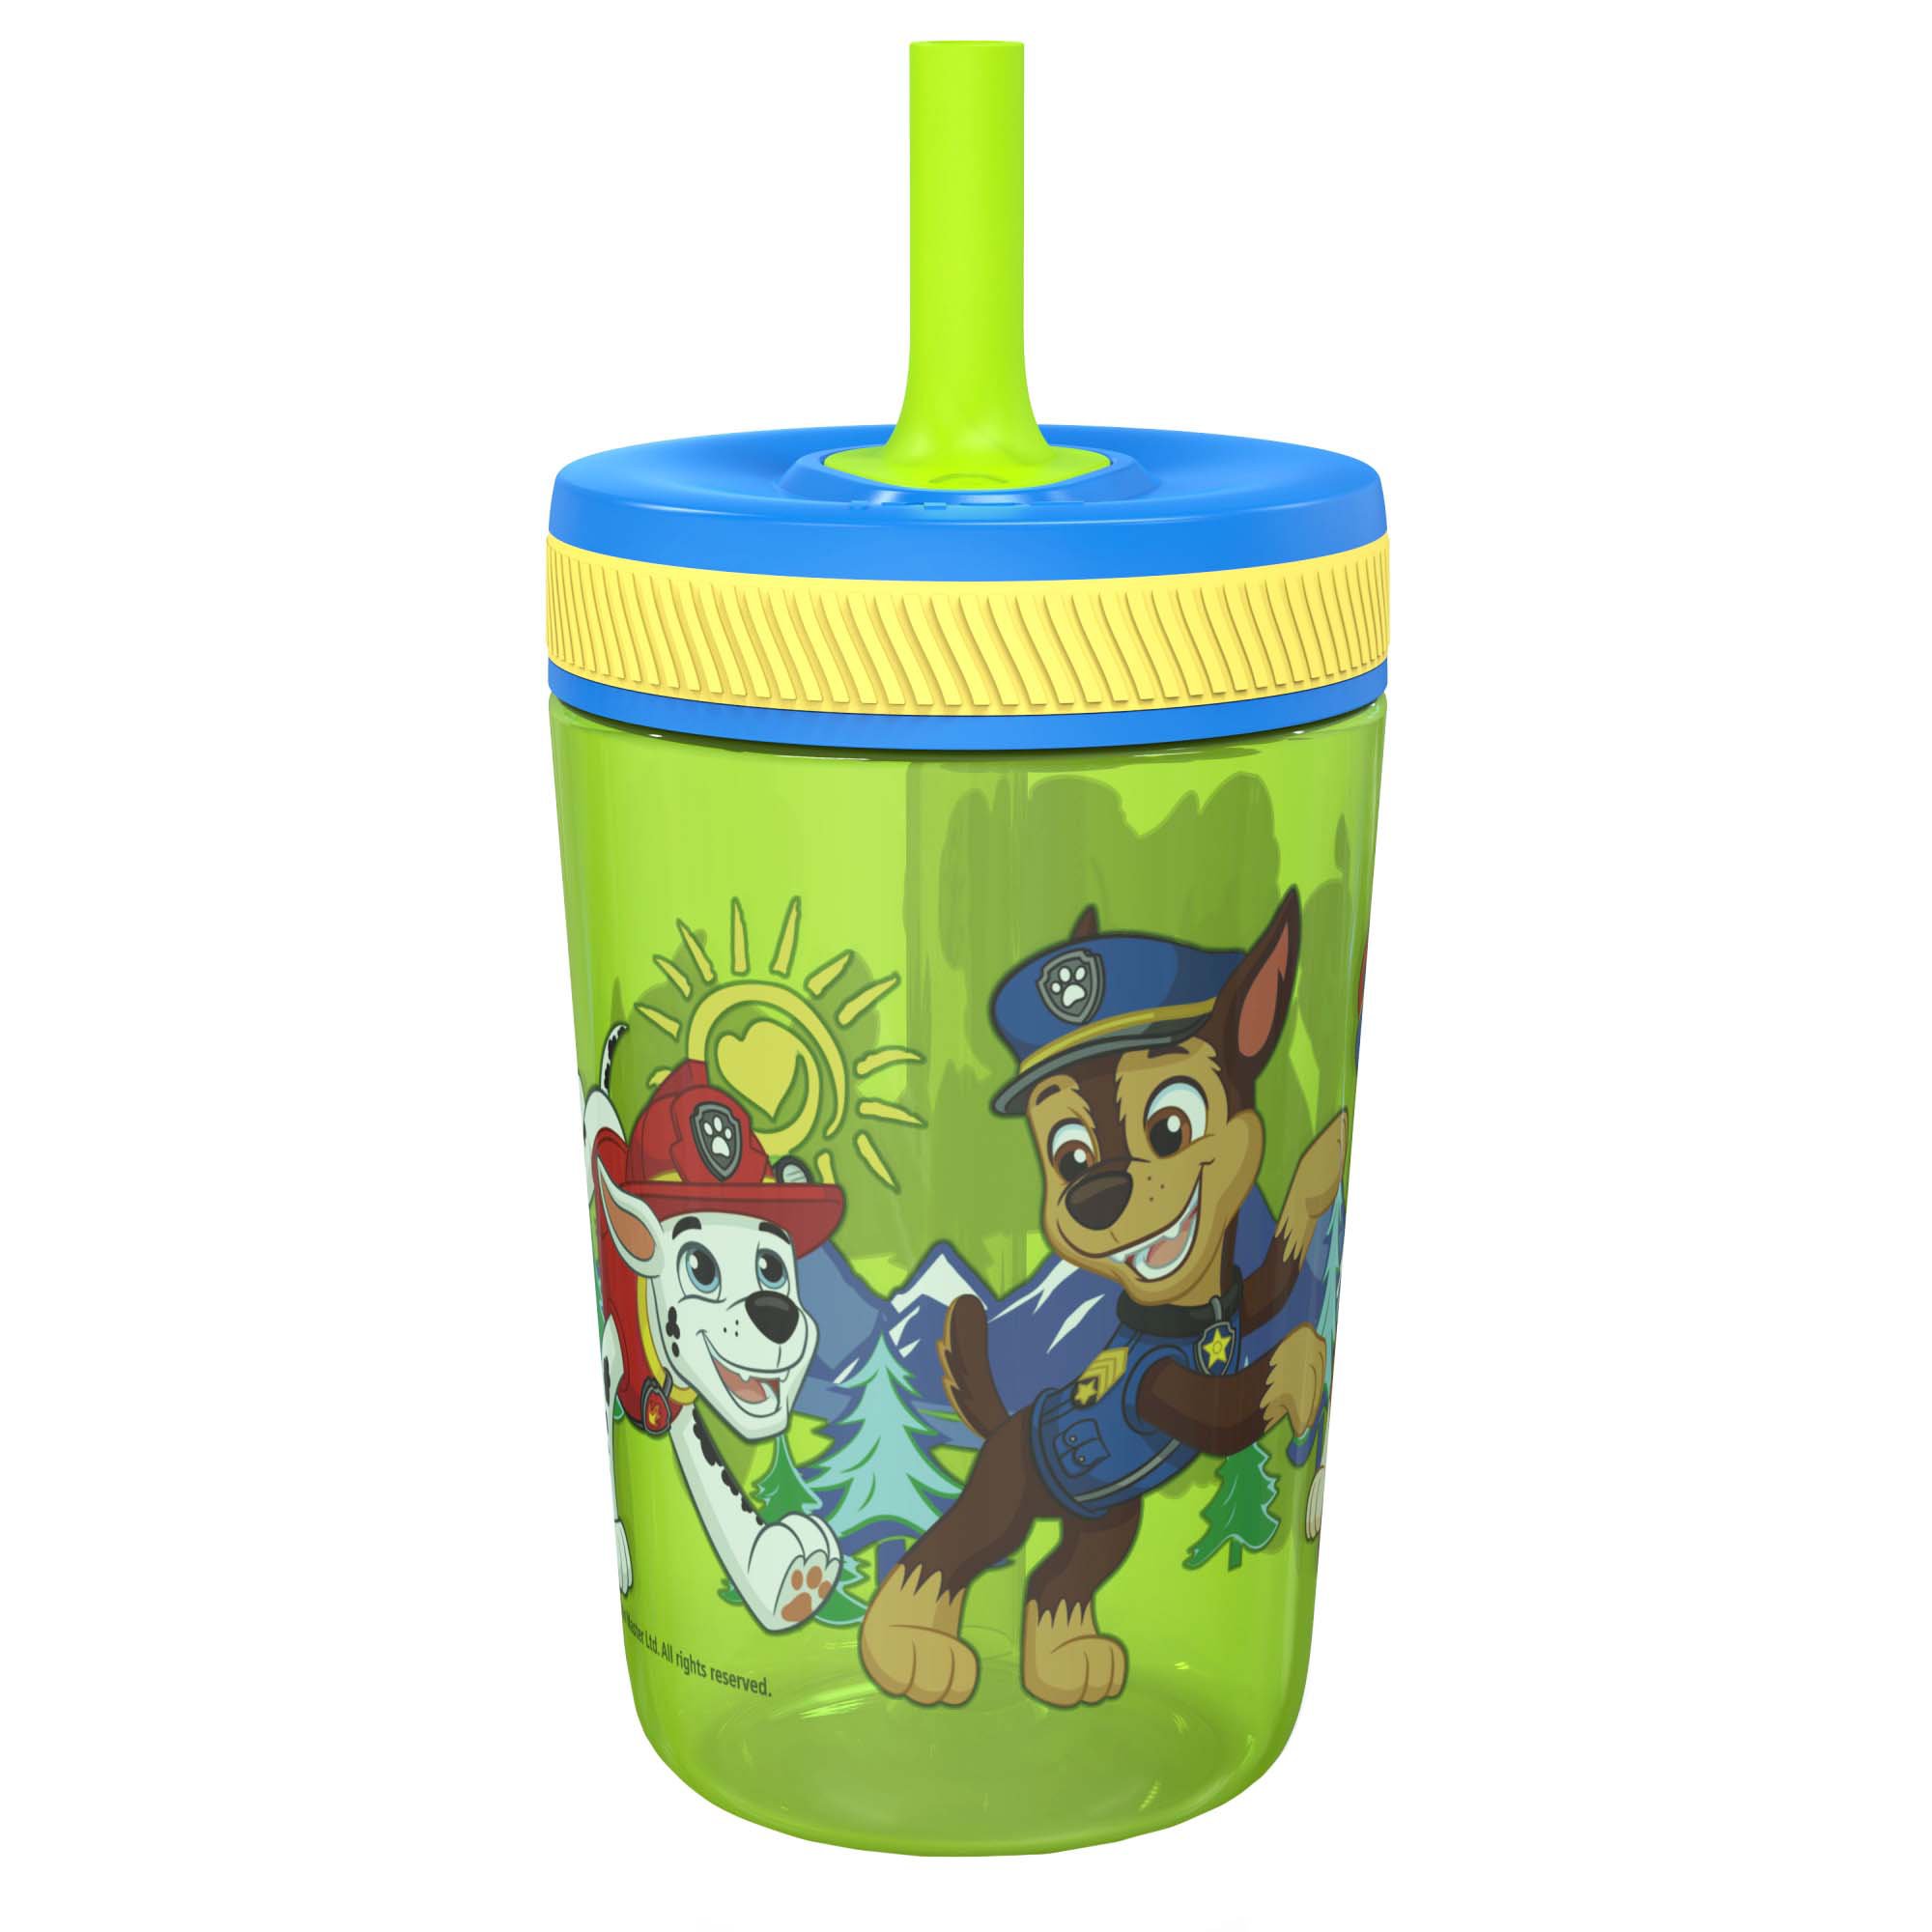  Zak Designs PAW Patrol Kelso Toddler Cups For Travel